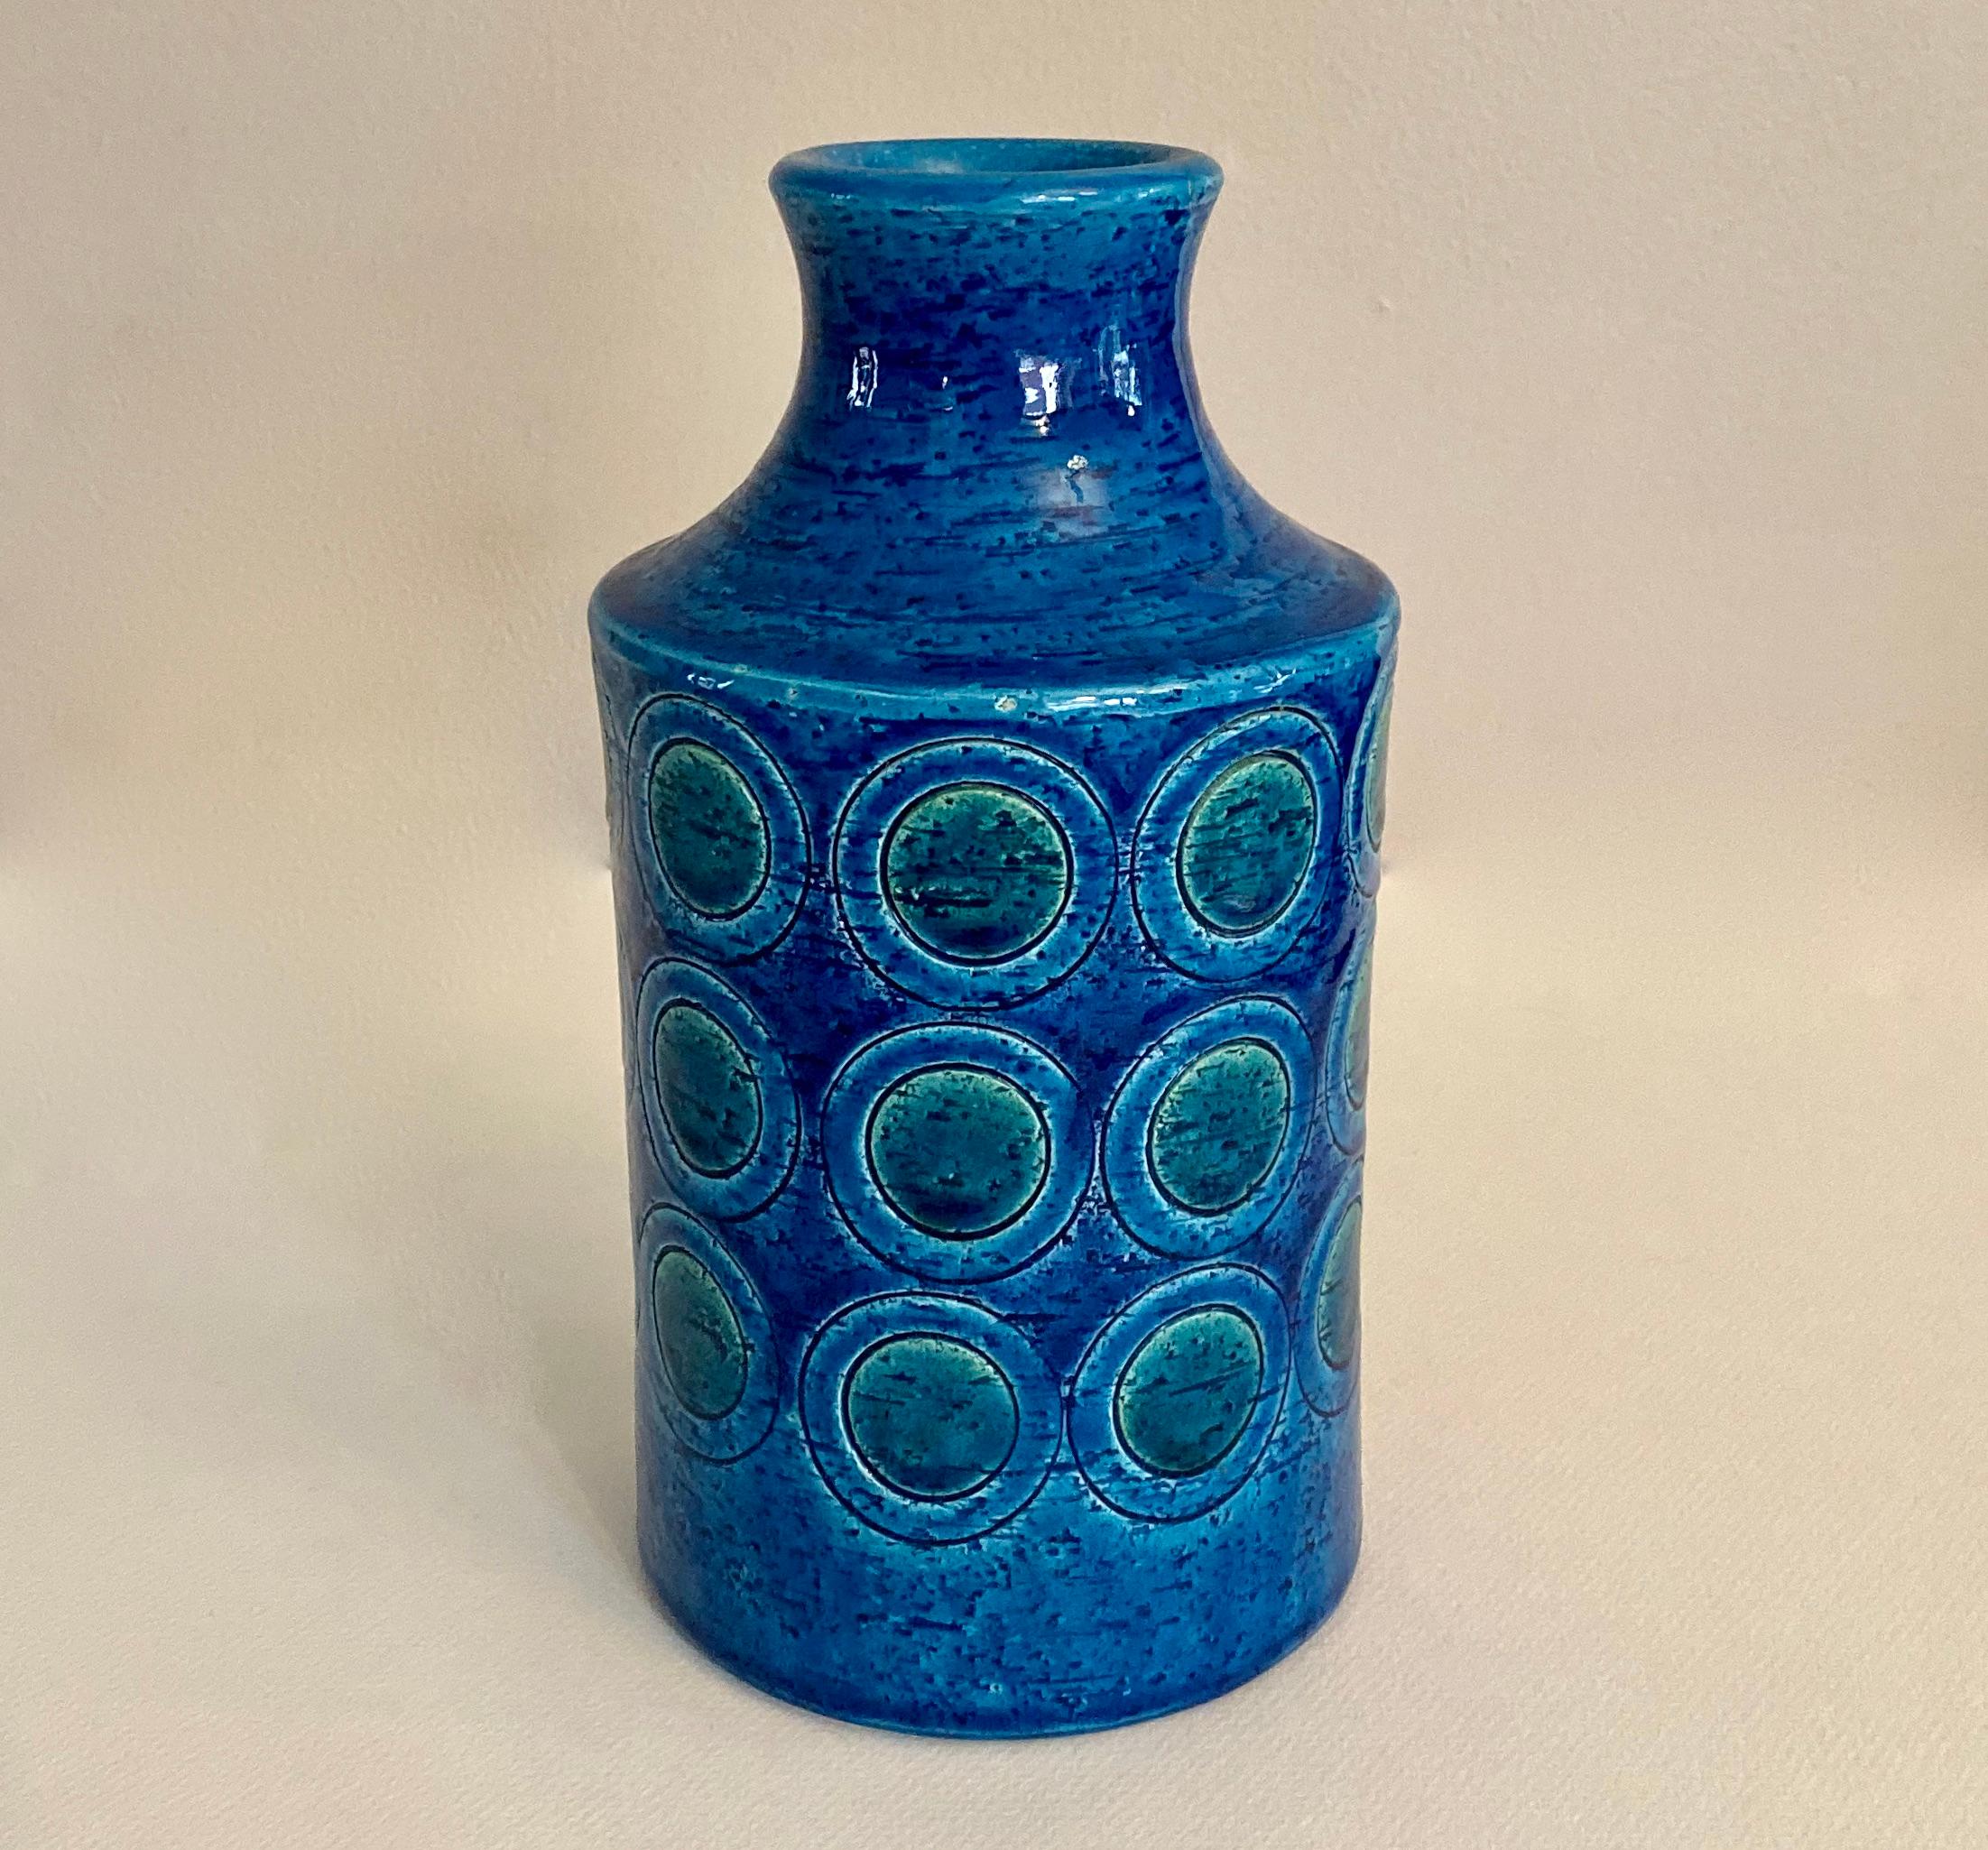 Italian ceramic vase by Bitossi designed by Aldo Londi in the rimini blue glaze of blues and aquas with incised circle motif. Maker's style # 4790. Retains 